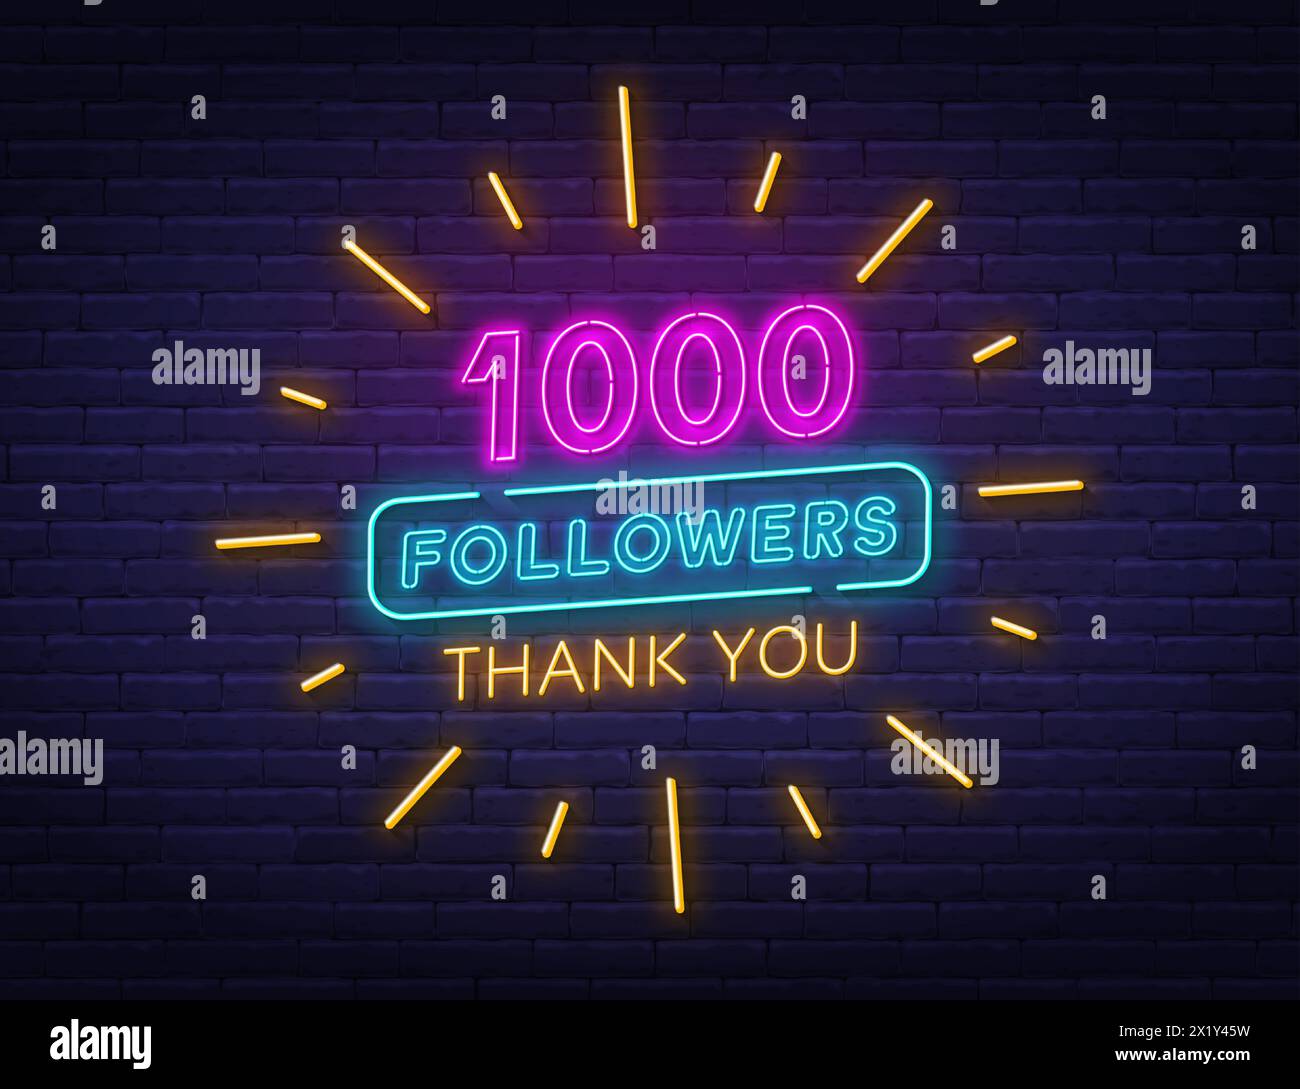 Neon message Thank You 1000 Followers on brick wall background. Stock Vector